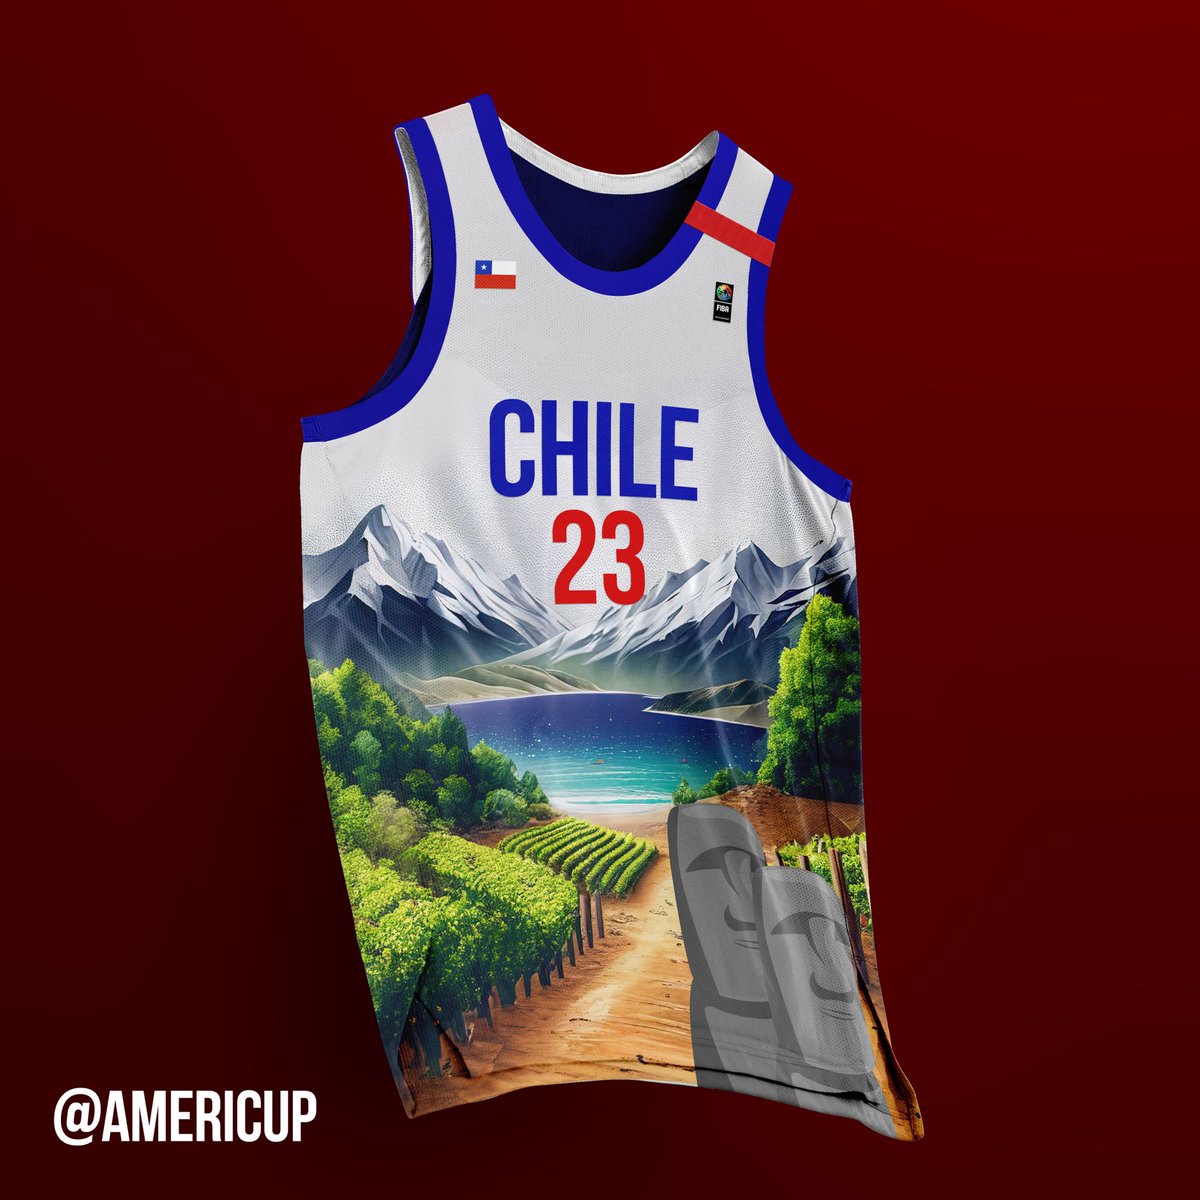 Group A jerseys redesigned 🎽🤩 🇦🇷🇻🇪🇨🇴🇨🇱 Which one is your favorite?! #AmeriCup